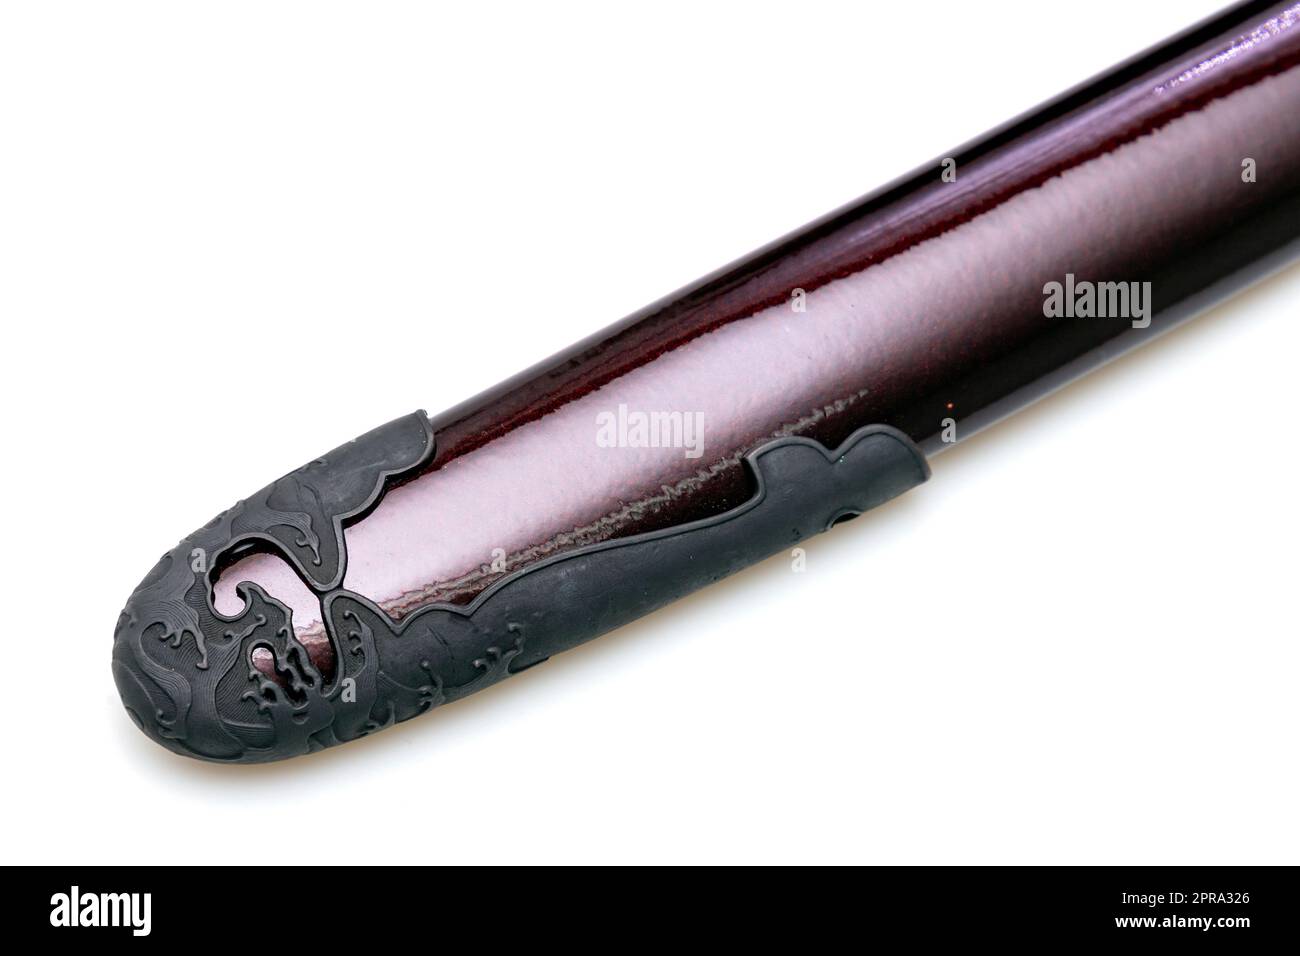 'Kojiri' is the end of the Japanese sword's scabbard or the protective fitting at the end of the scabbard. Normally made by horn but in this picture is metal. Isolated in white Background. Stock Photo